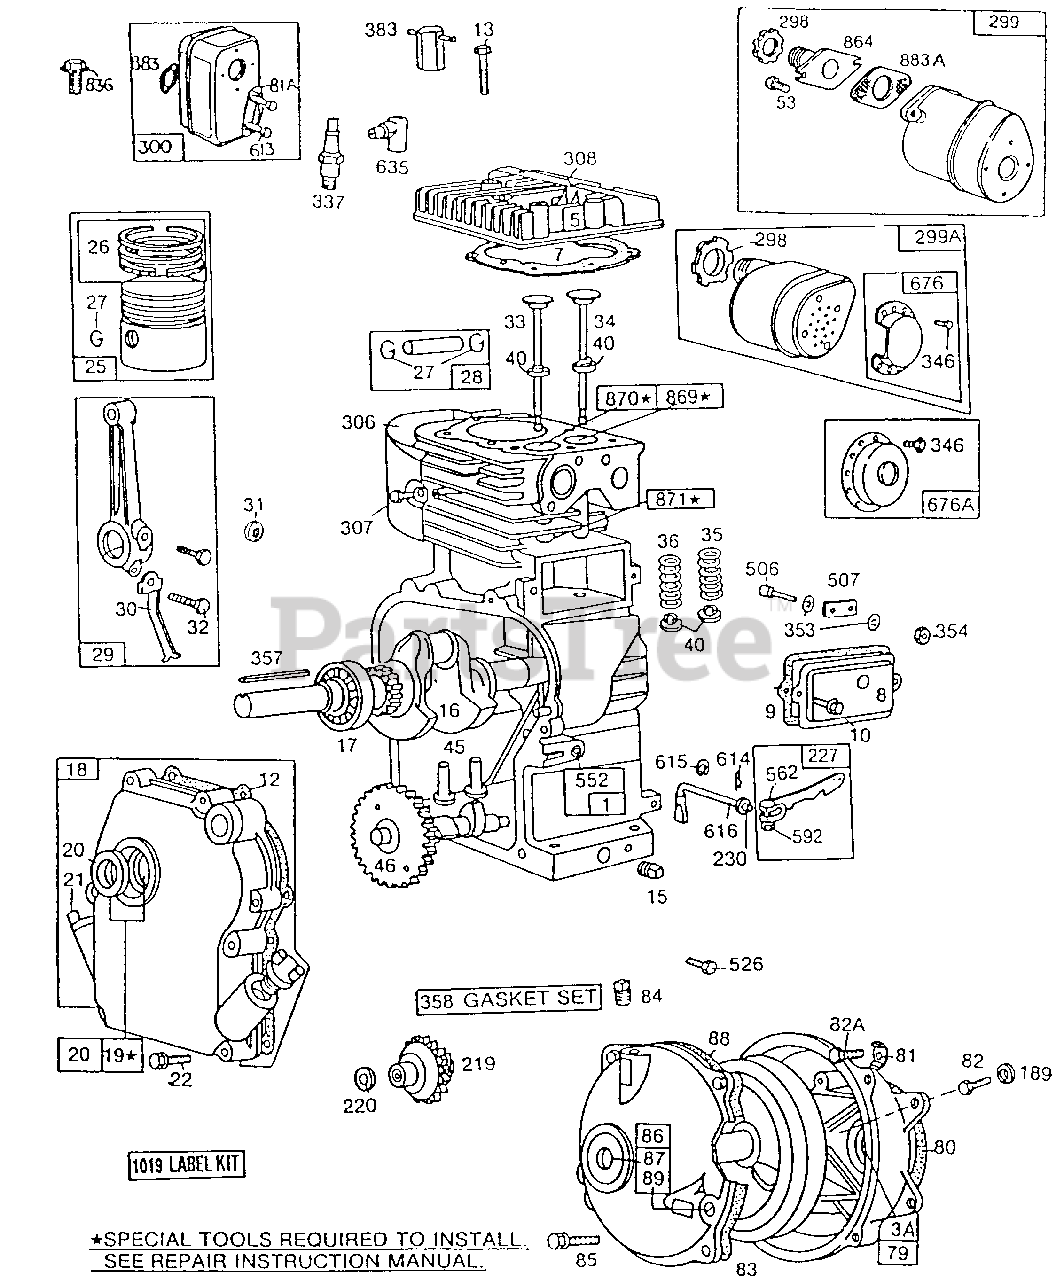 Briggs & Stratton 112231-0811-01 - Briggs & Stratton Horizontal Engine  Cyl,Oil Fill,Piston,Mufflers Parts Lookup with Diagrams